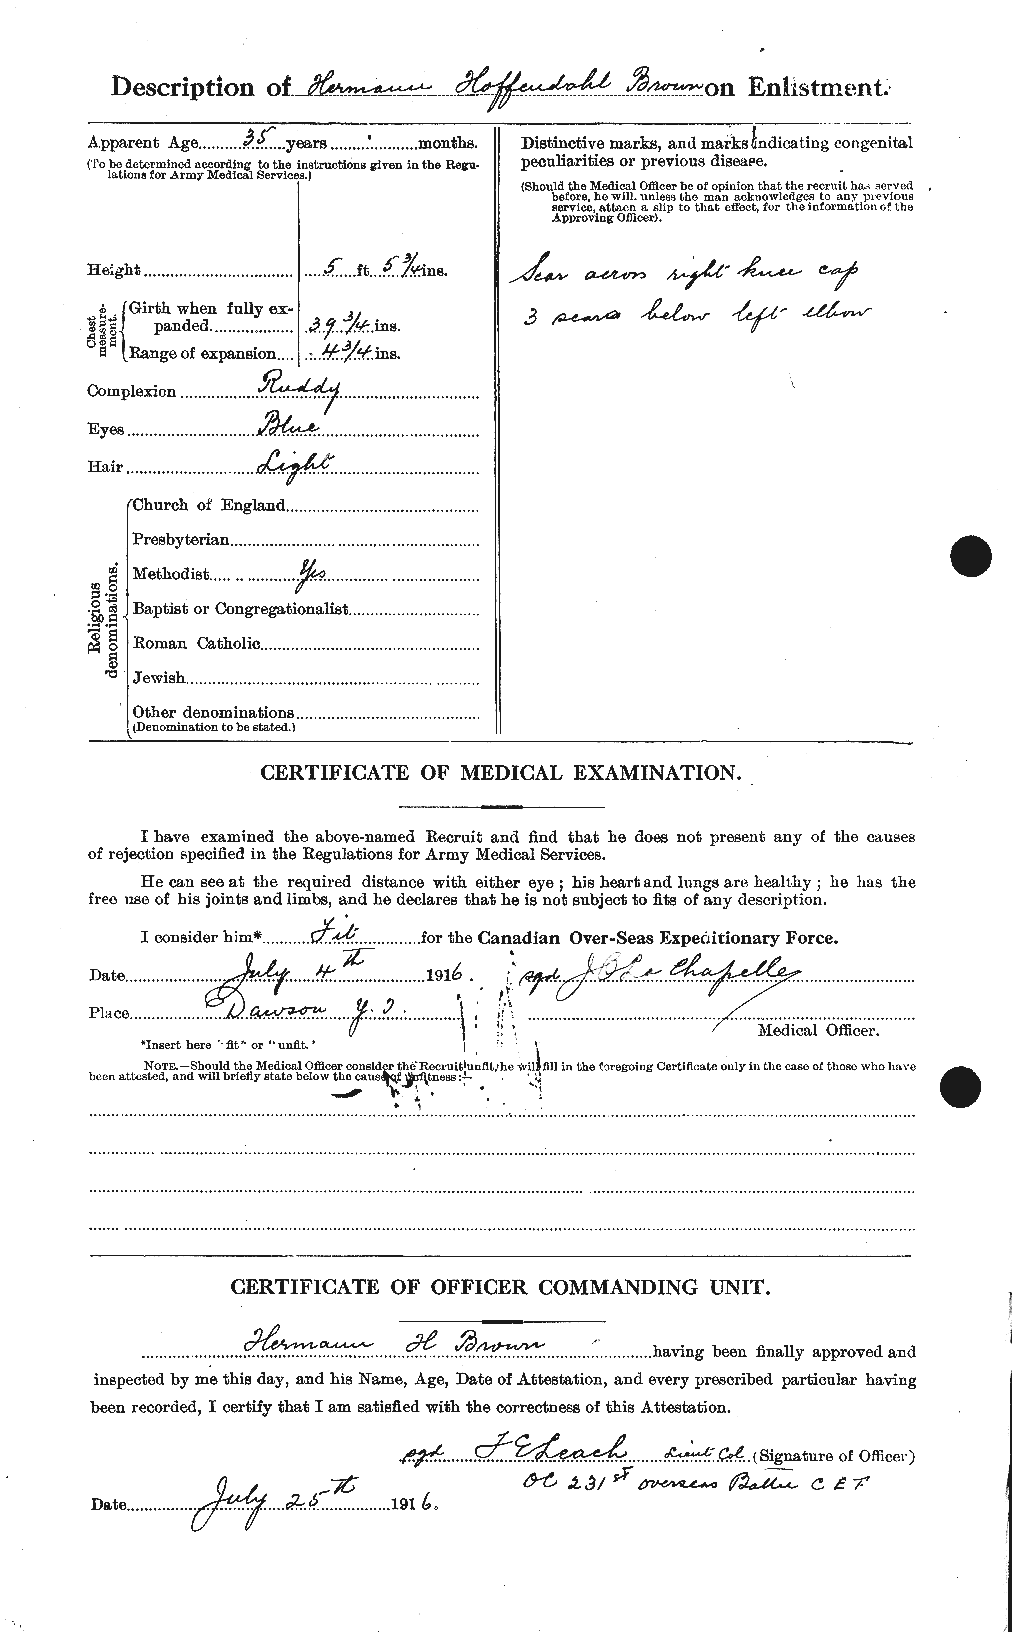 Personnel Records of the First World War - CEF 265598b